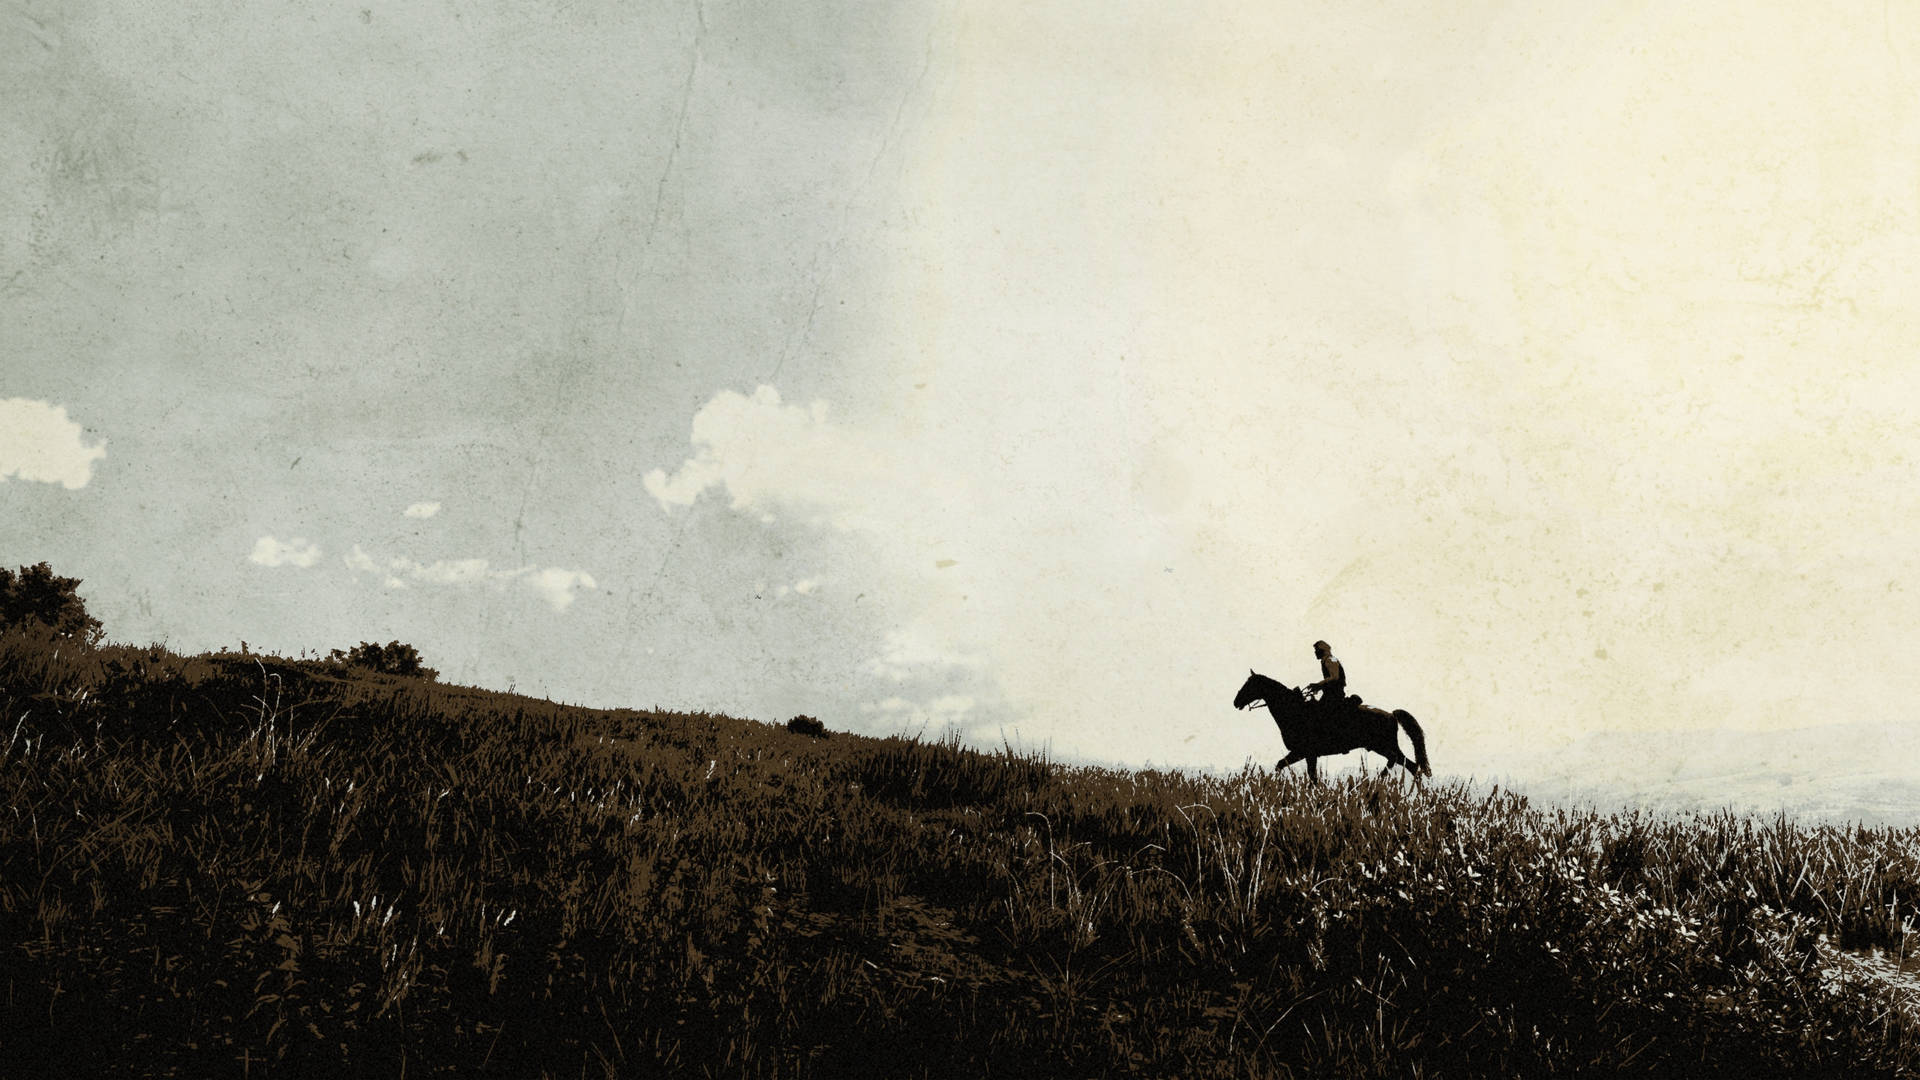 "Be the Outlaw of the West in Red Dead Redemption 2" Wallpaper